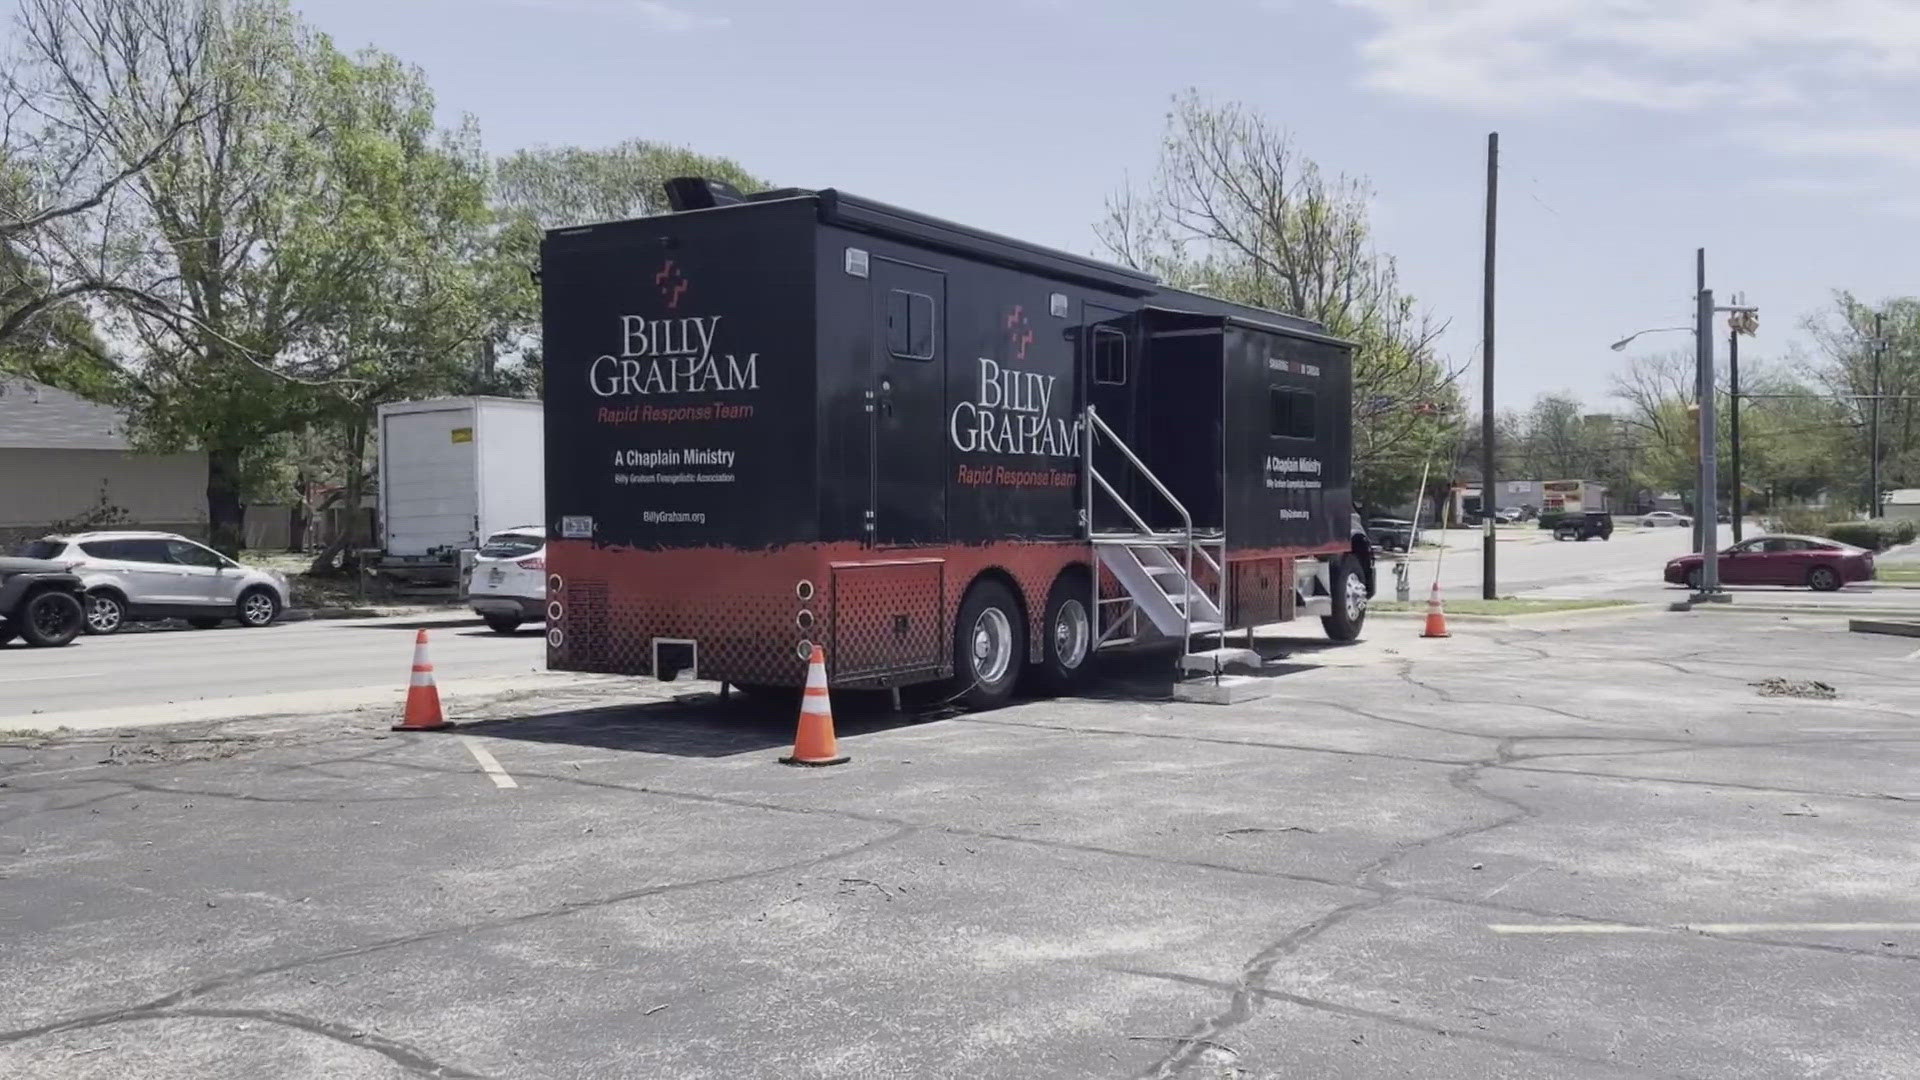 Billy Graham Crisis teams partnered with Samaritan's Purse to bring a message of hope and healing to victims of the Temple tornado.